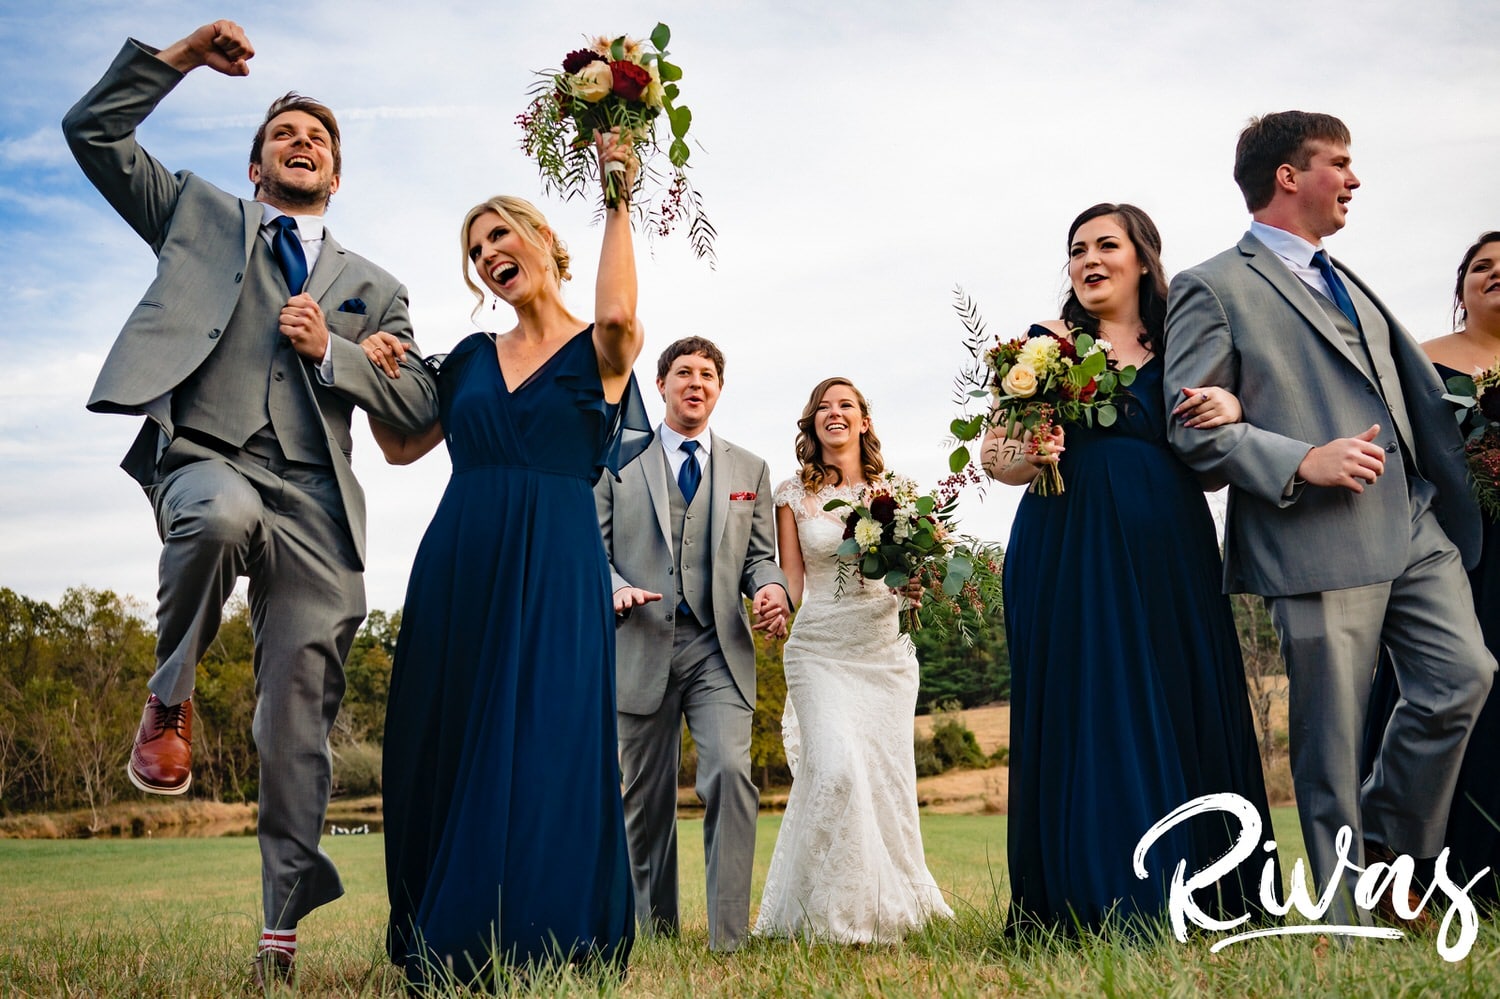 A causal, colorful picture of a bride and groom walking arm in arm with their joyous wedding party across a field on their fall wedding day at The Barns at Hamilton Station Vineyard. 